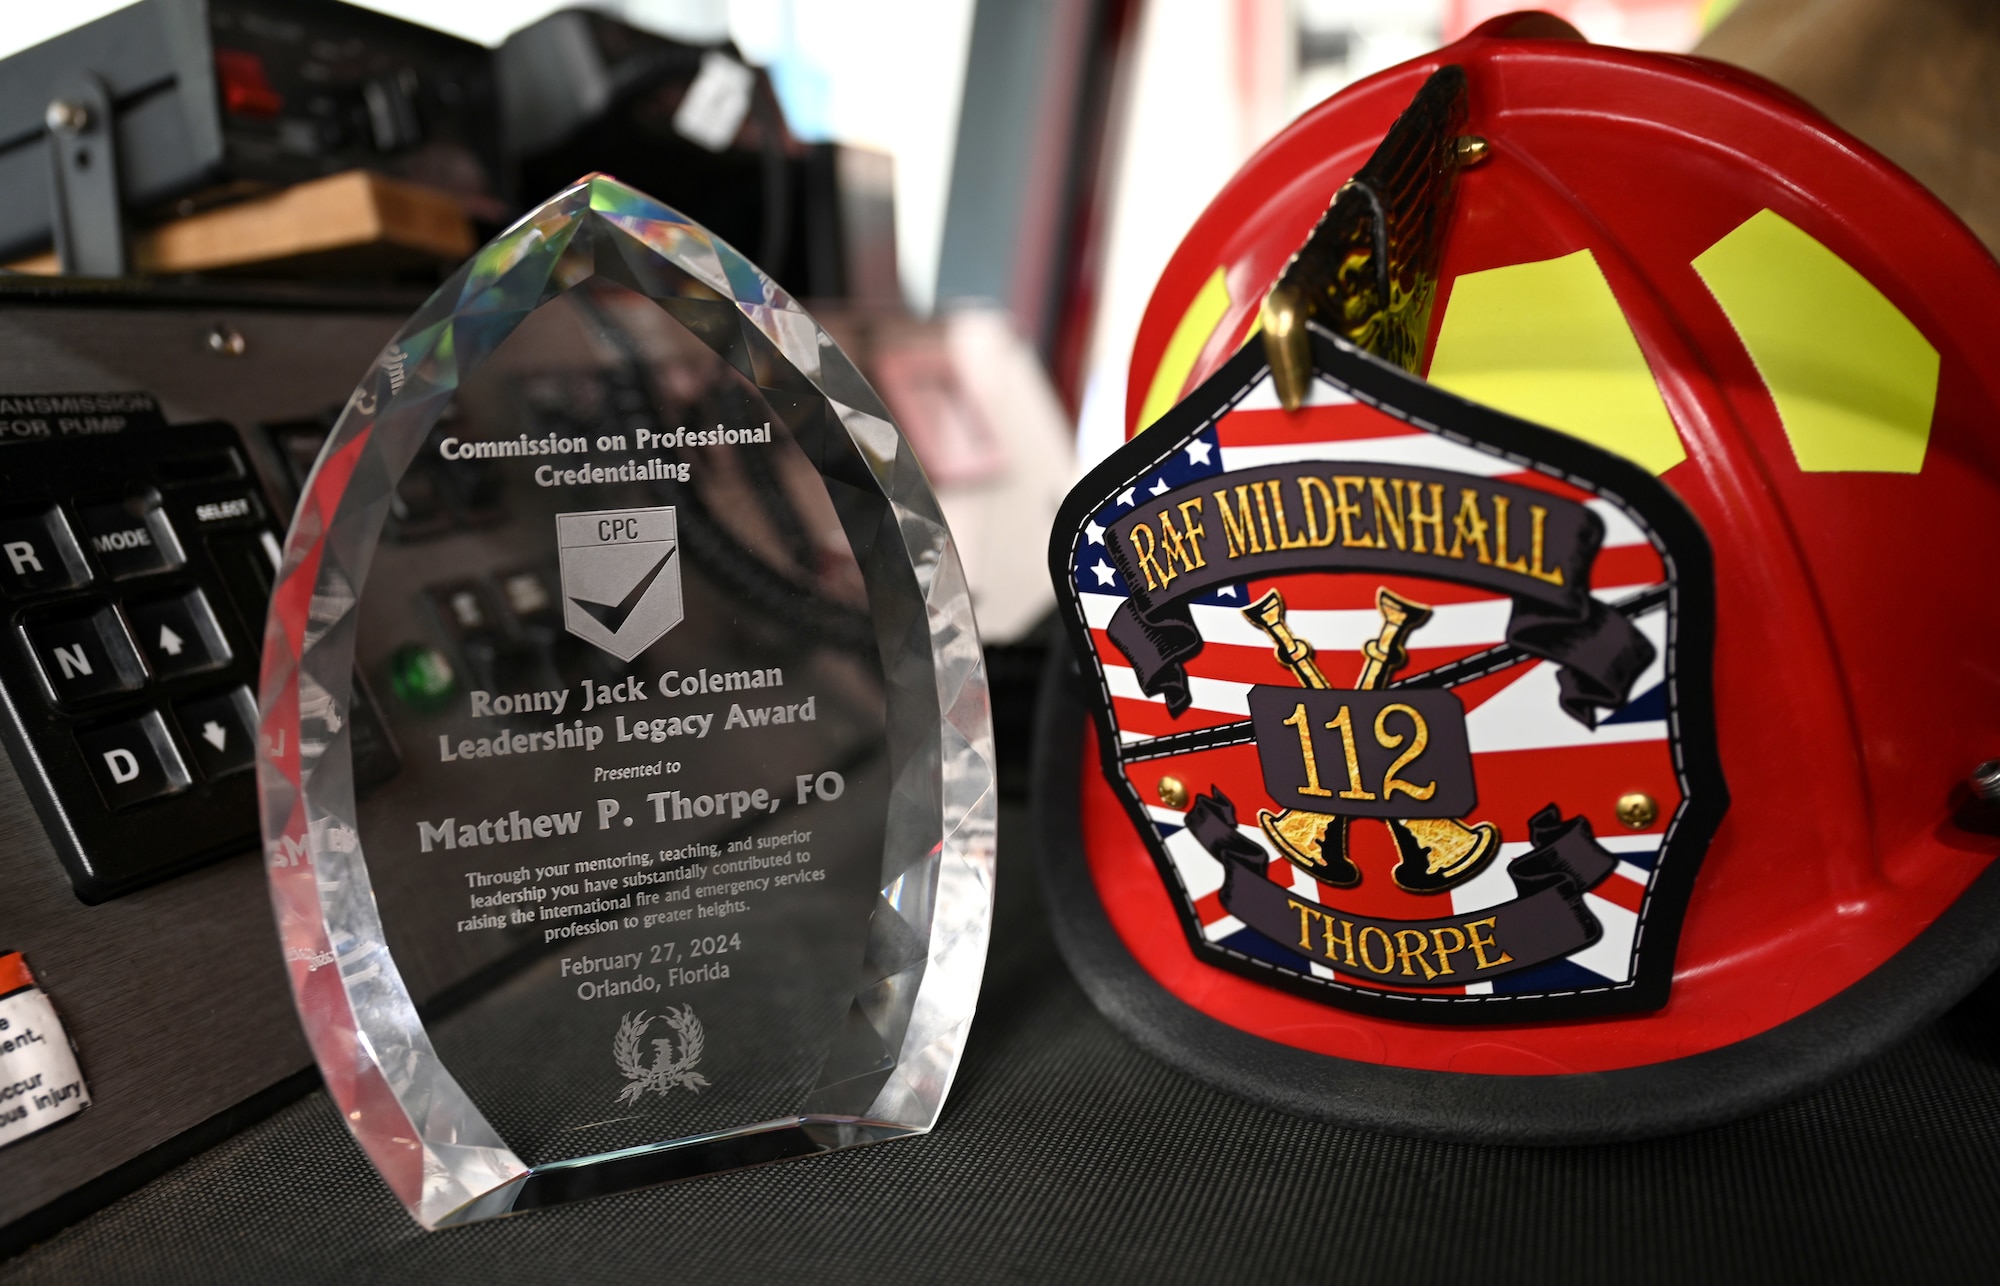 Watch Manager (Blue Watch) Matt Thorpe, 100th Civil Engineer Squadron Fire Department Fire Officer, recently won the 2024 Ronny Jack Coleman Leadership Legacy Award. Presented by the Commission on Professional Credentialing, the award recognizes superior leadership and actions that have elevated the fire and emergency service profession. Thorpe is the first British recipient – and first who is not a fire chief – to win the legacy award. (U.S. Air Force photo by Karen Abeyasekere)